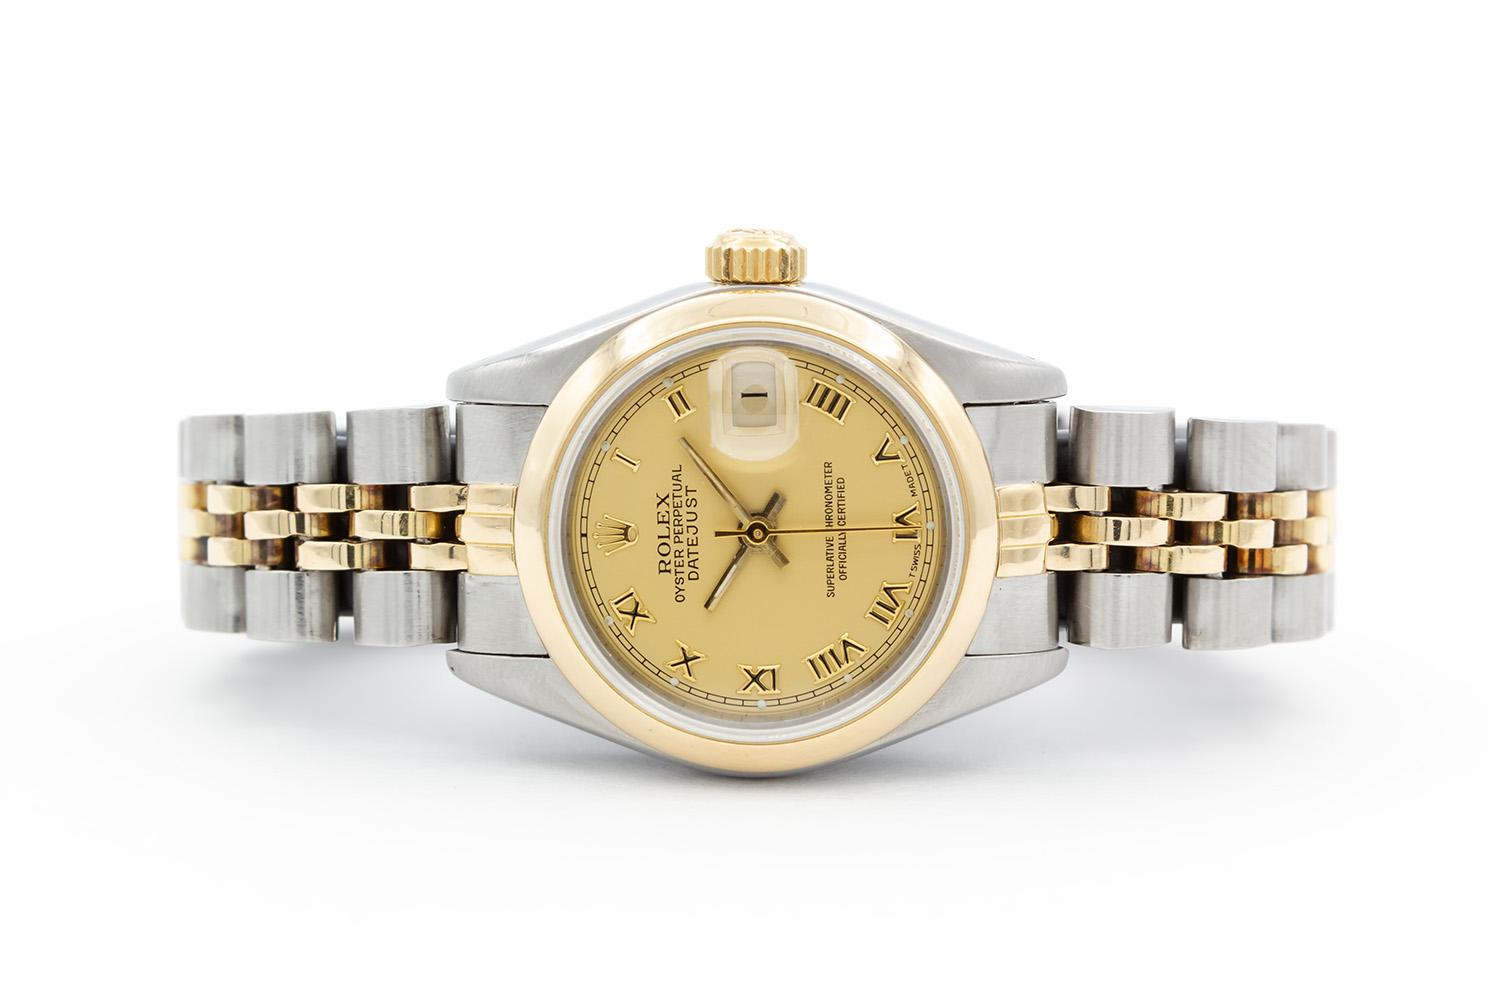 We are pleased to offer this 1987 Rolex Ladies Two Tone Datejust 69173. This is a classic ladies watch, timeless in its design. It features a 26mm stainless steel case, 18k yellow gold smooth bezel, champagne roman dial and two tone stainless steel